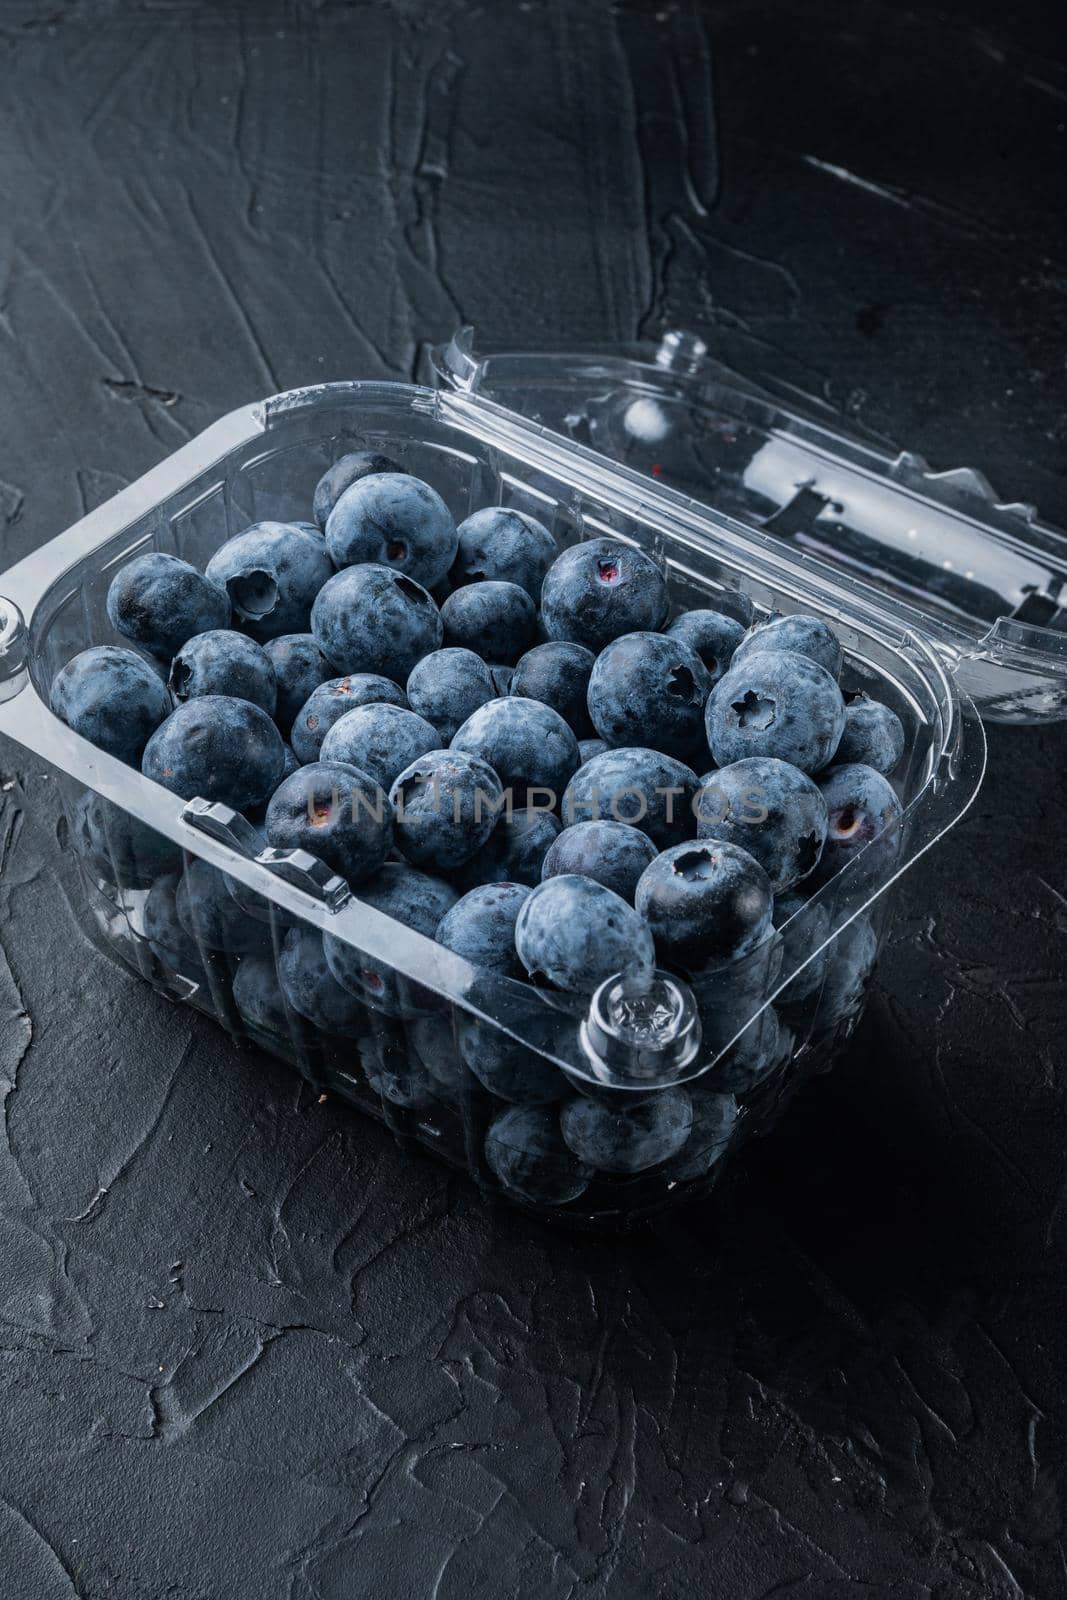 Blueberries in clear plastic tray, on black background by Ilianesolenyi